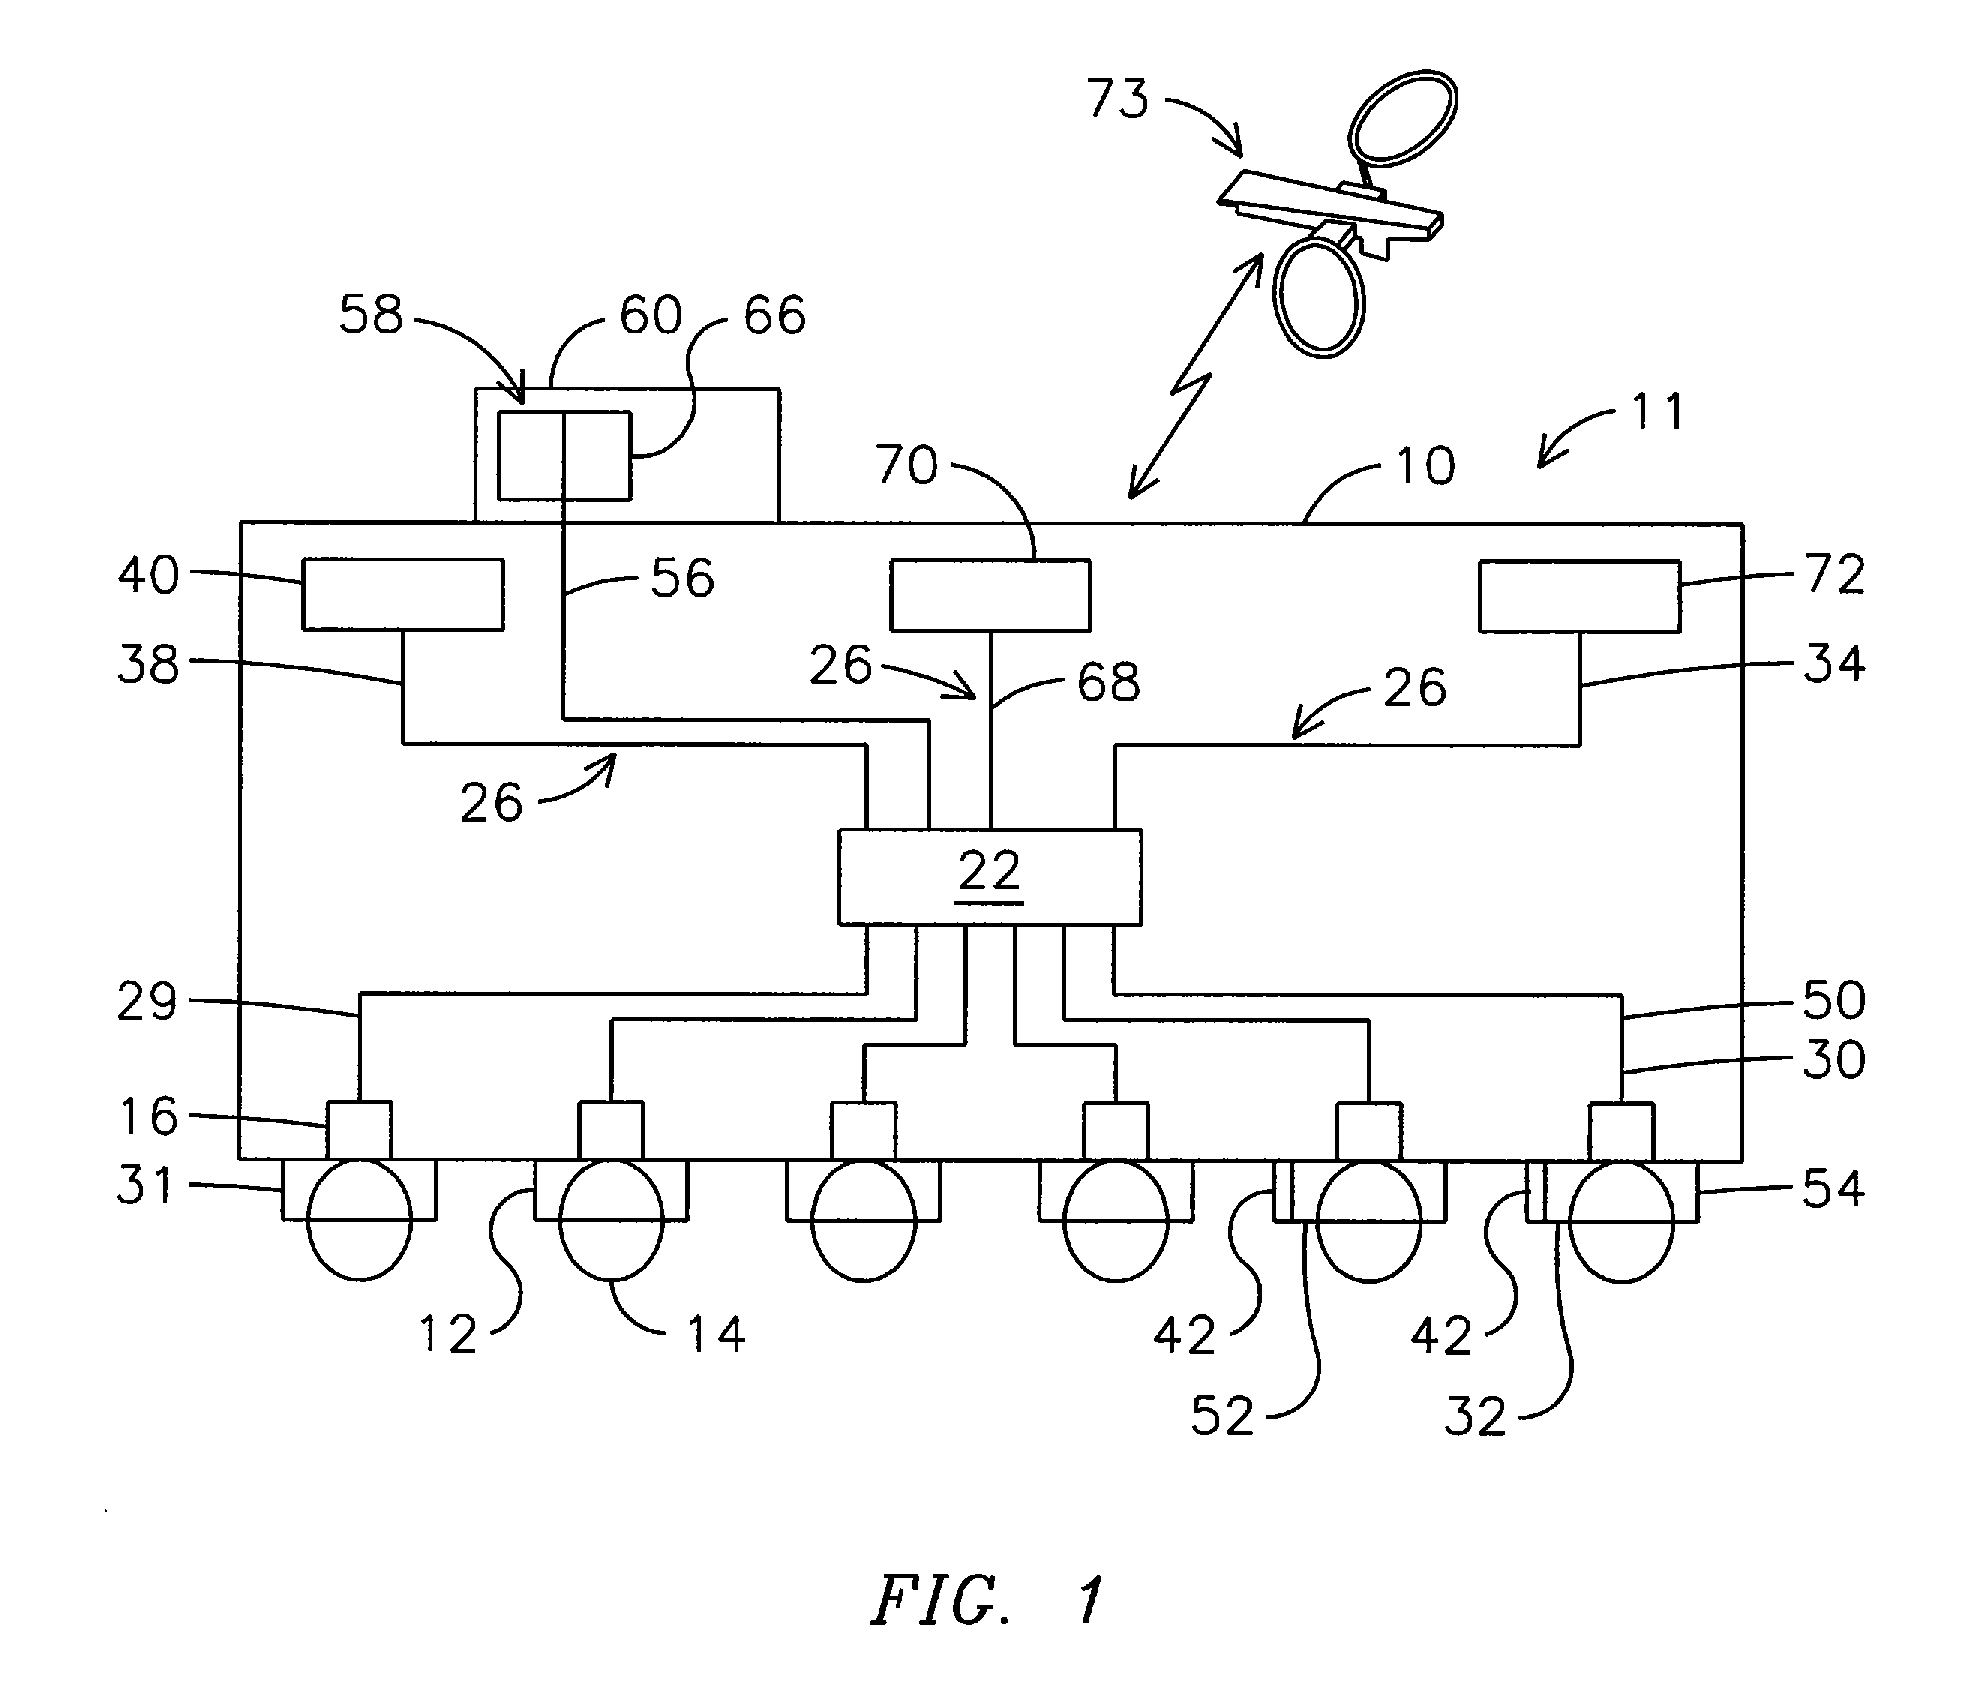 System, Method and Computer Readable Media for Reducing Wheel Sliding on a Locomotive